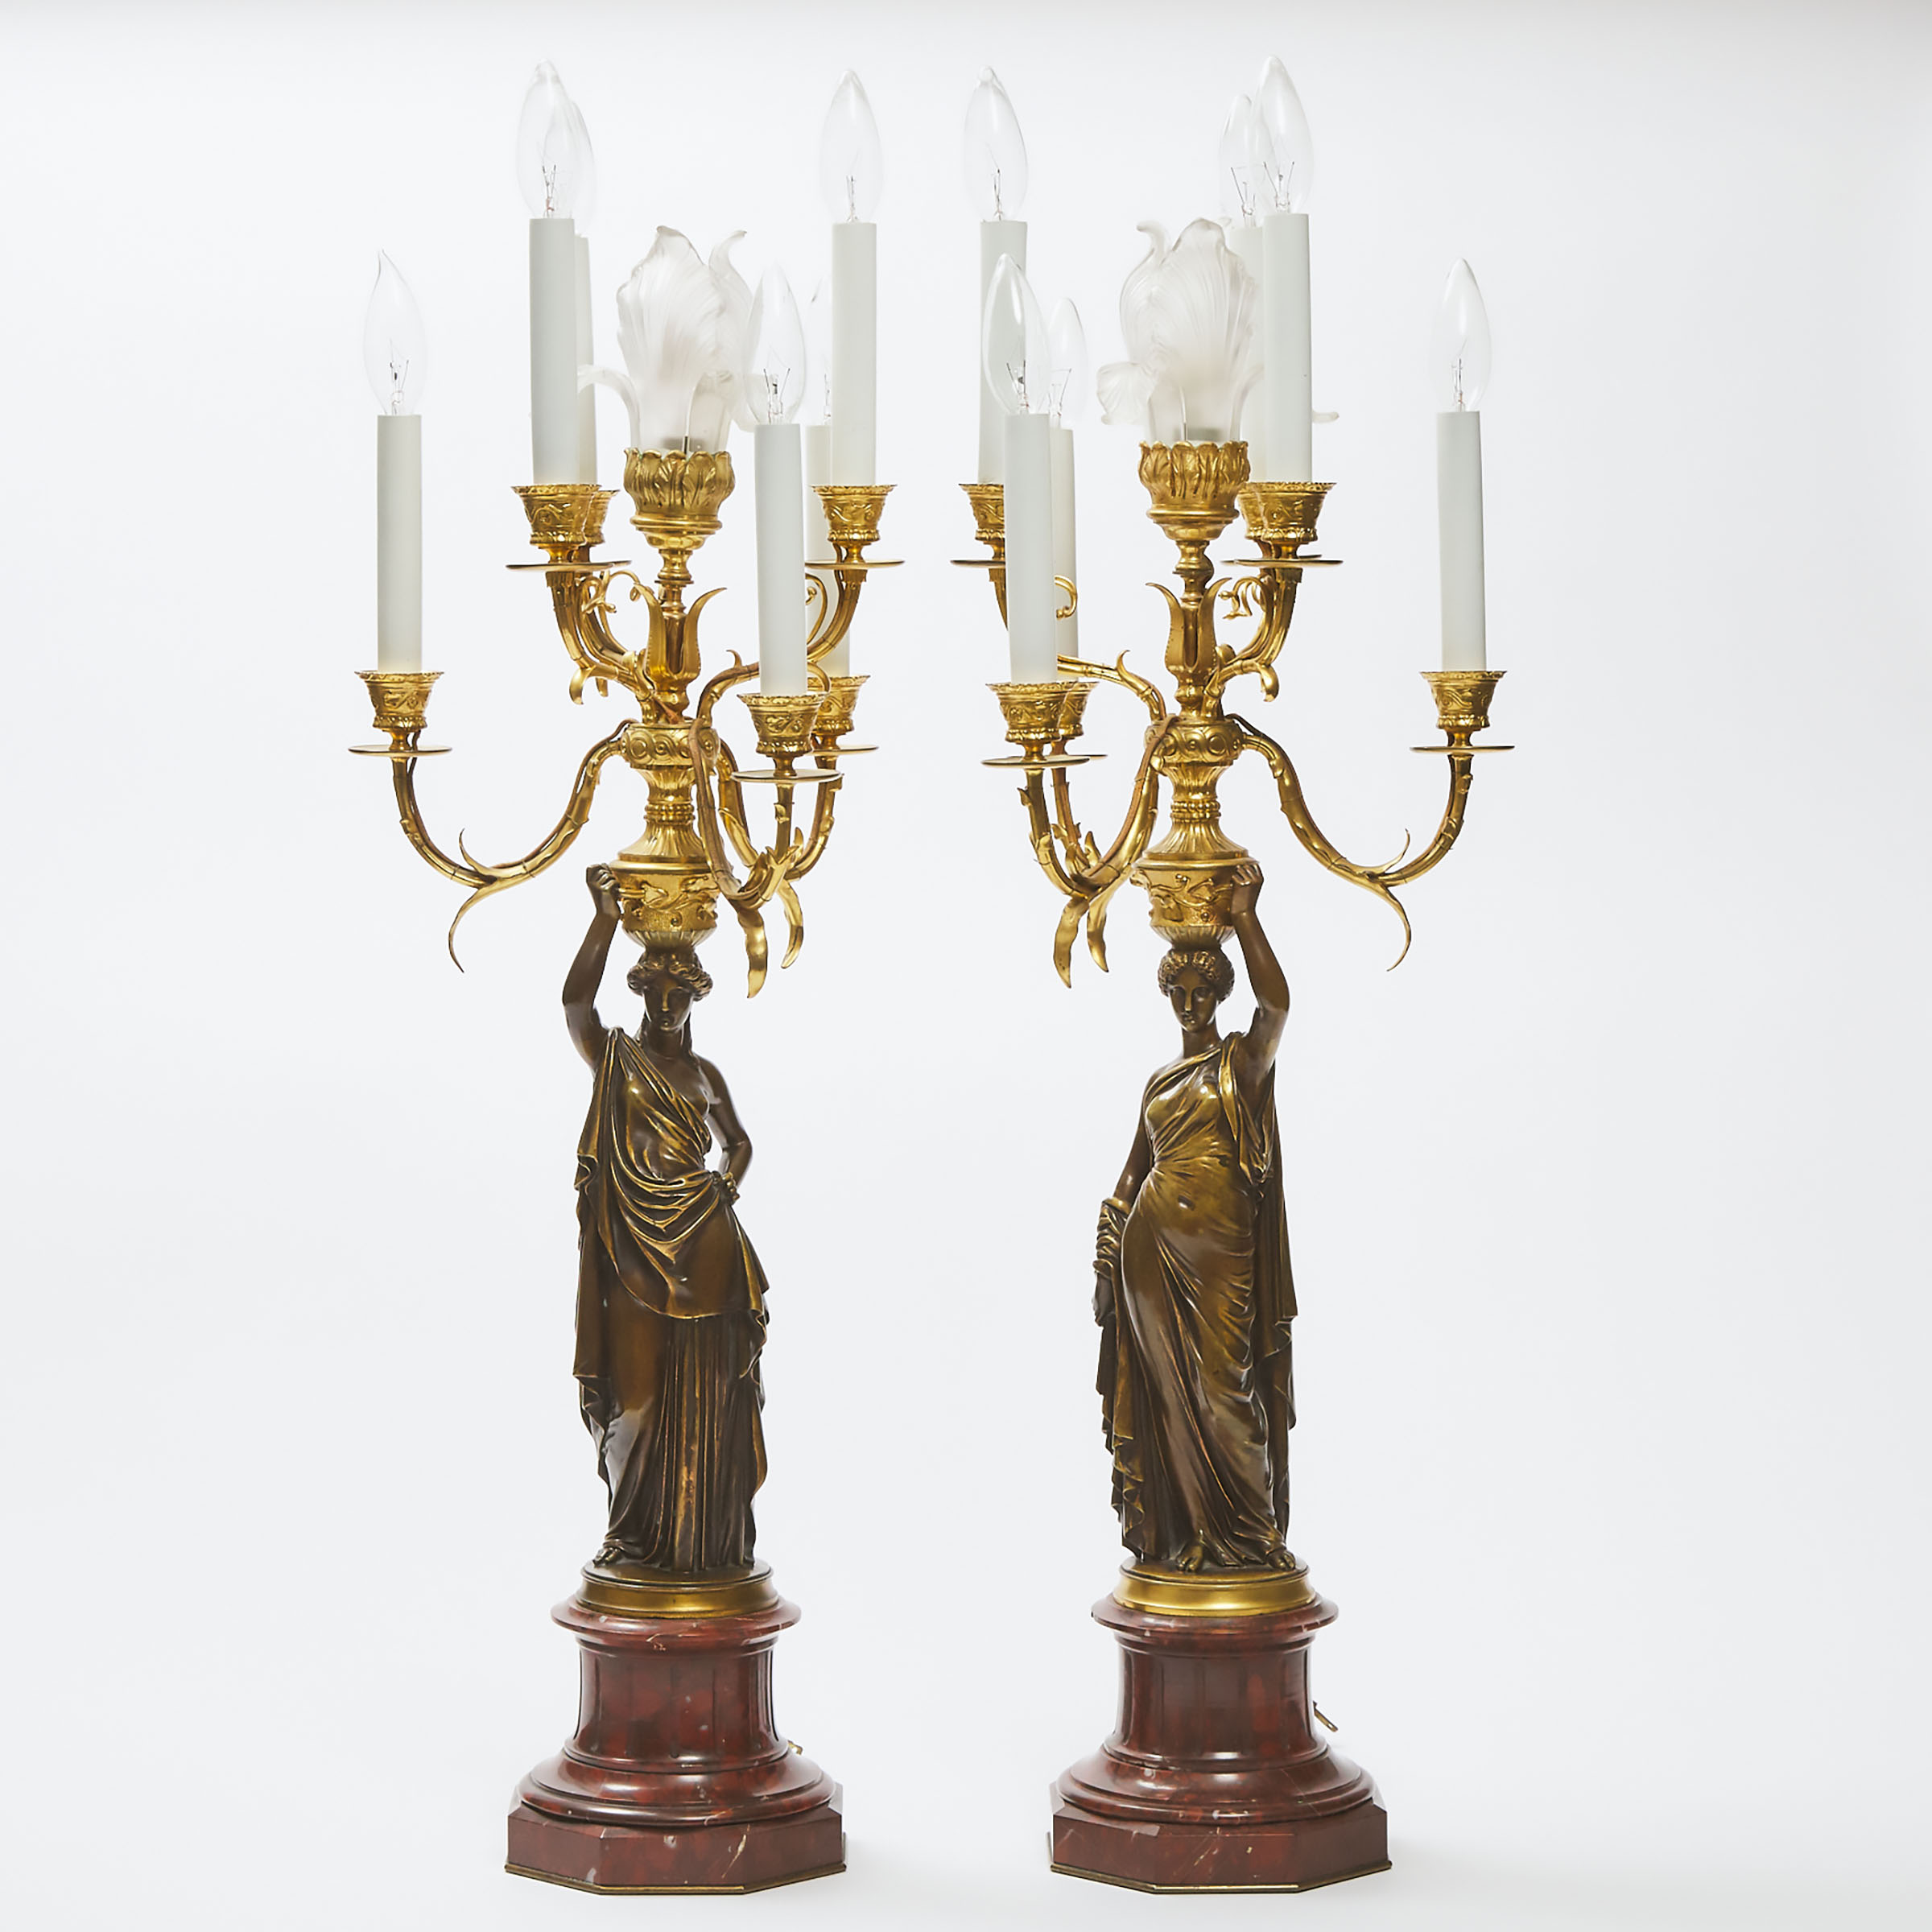 Pair of French Neo Grec Gilt and Patinated Bronze Figural Candelabra after Louis Valentin Elias Robert (French, 1821-1874), c.1860